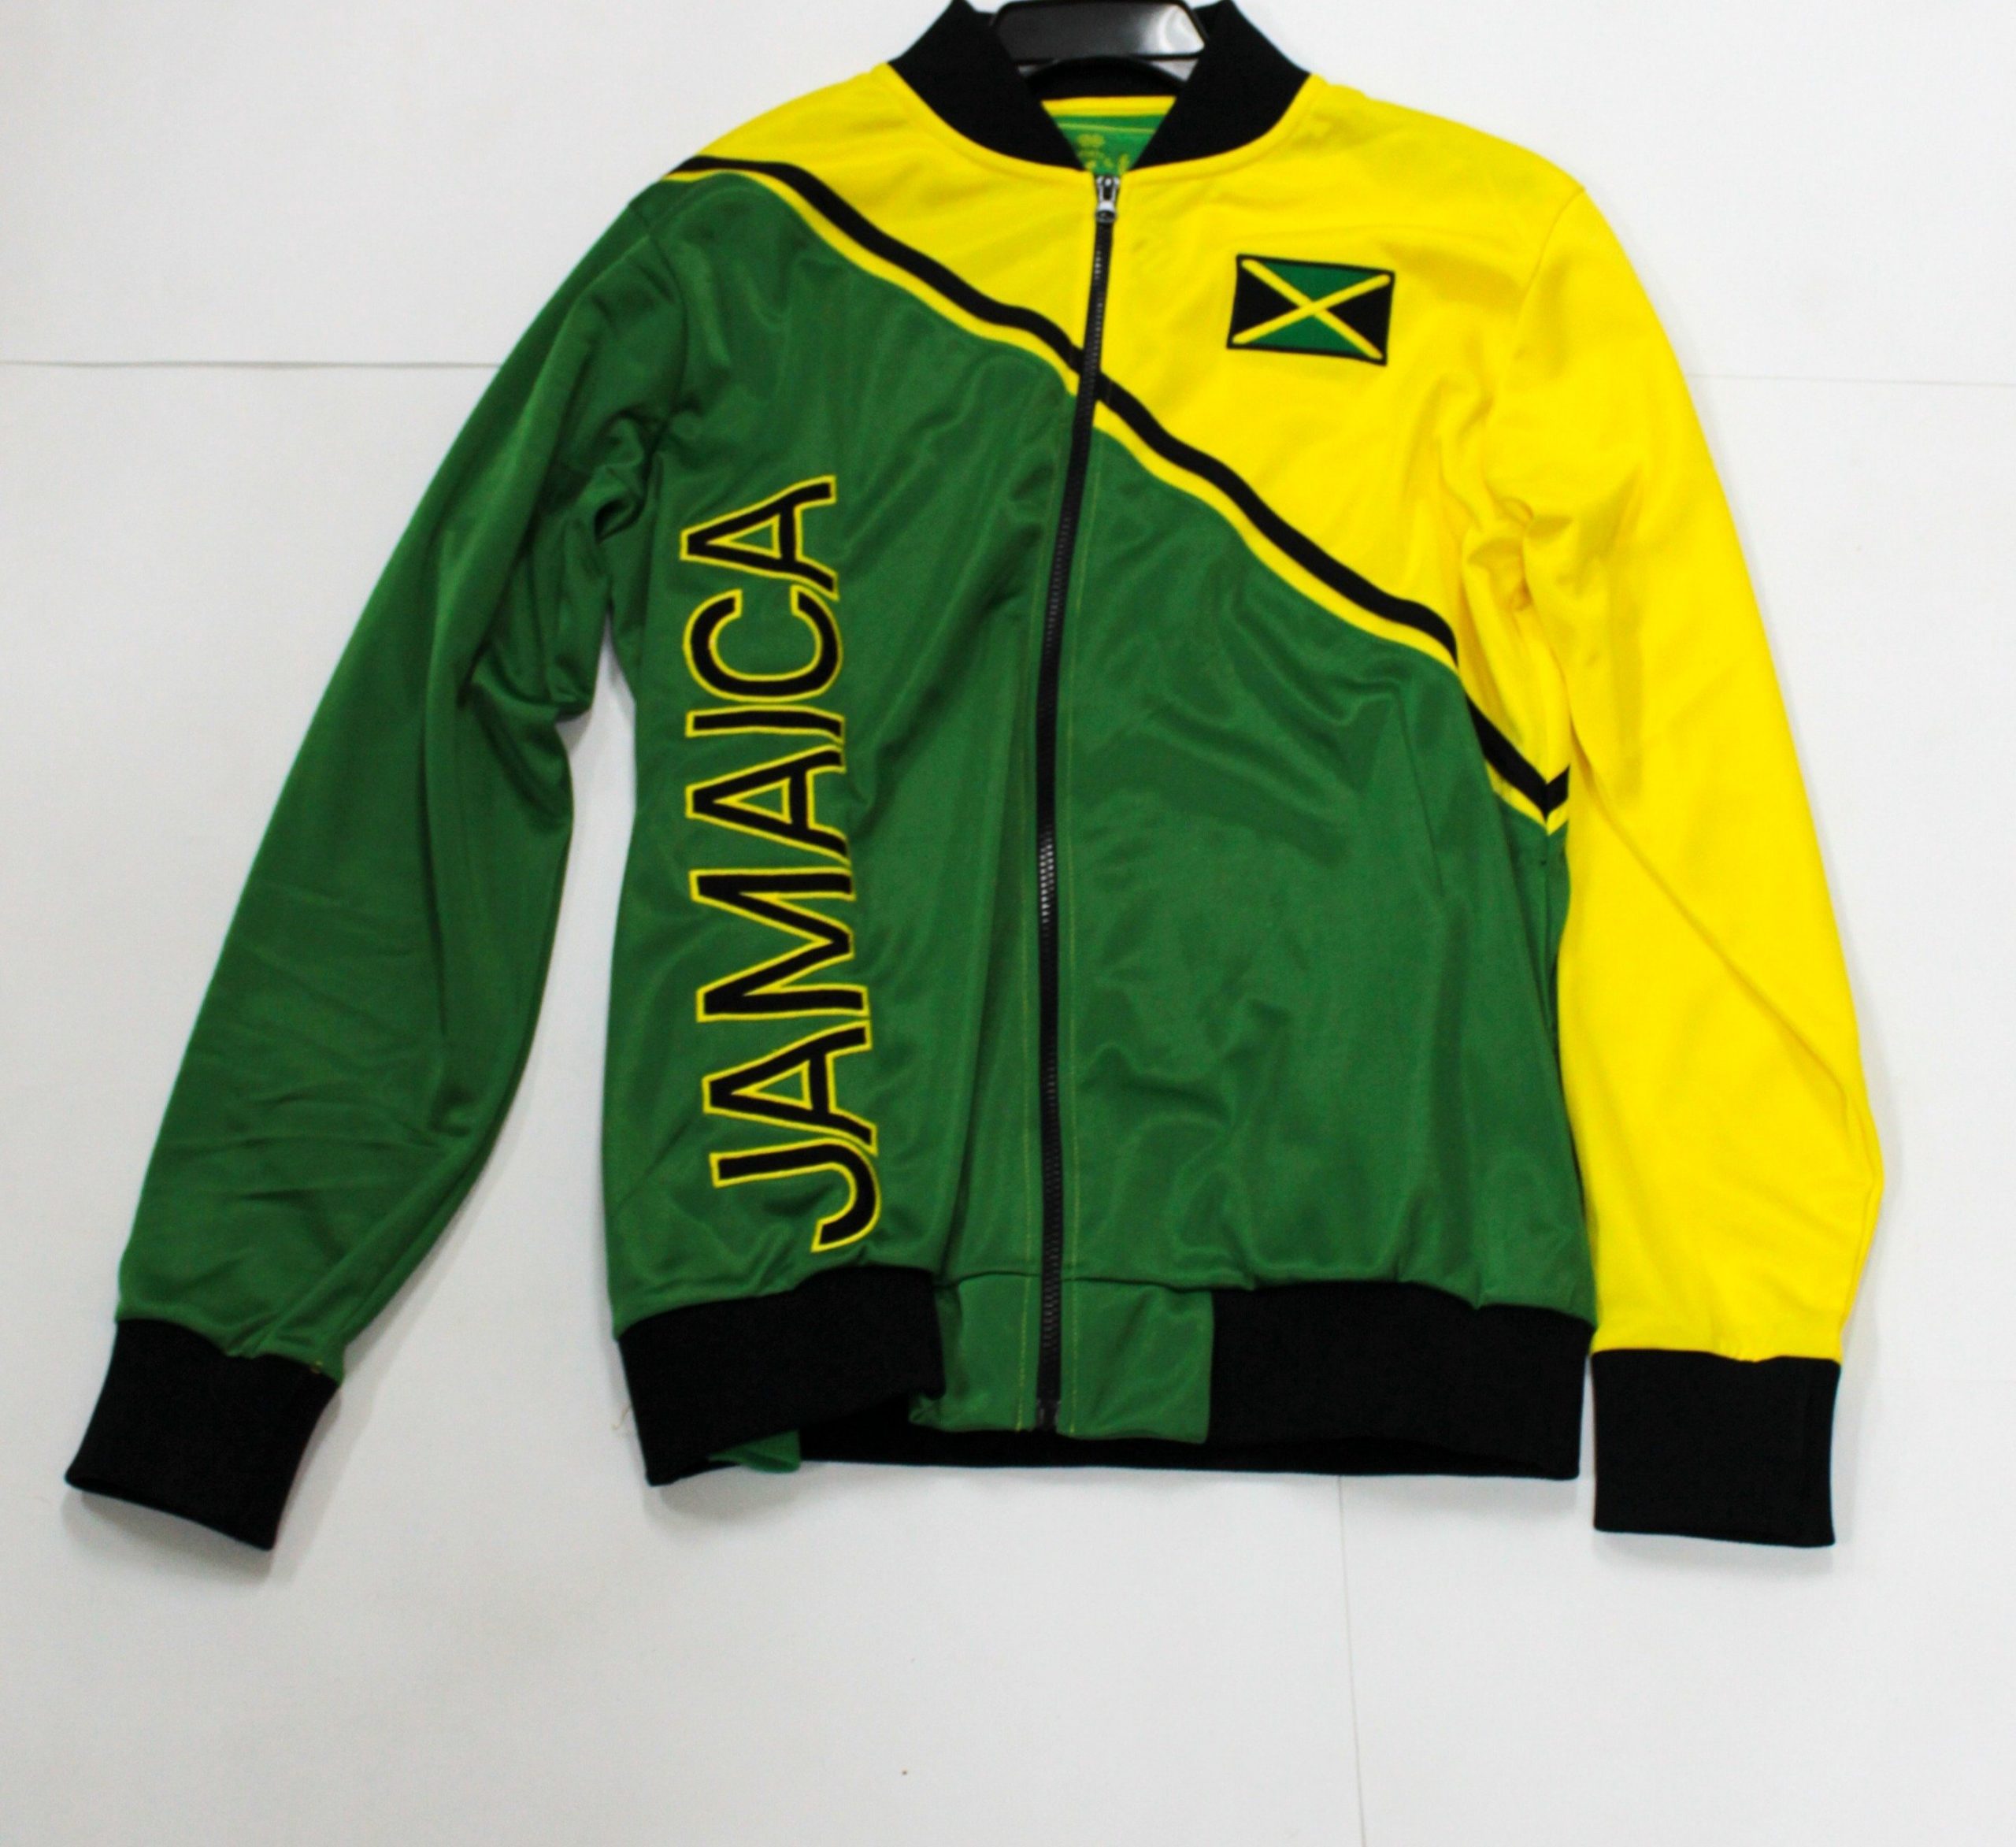 Black, Green and Yellow Unisex - L Jamaica Pround Power Authentic Jamaican Long Sleeved Reggae Zip-Up Jacket 